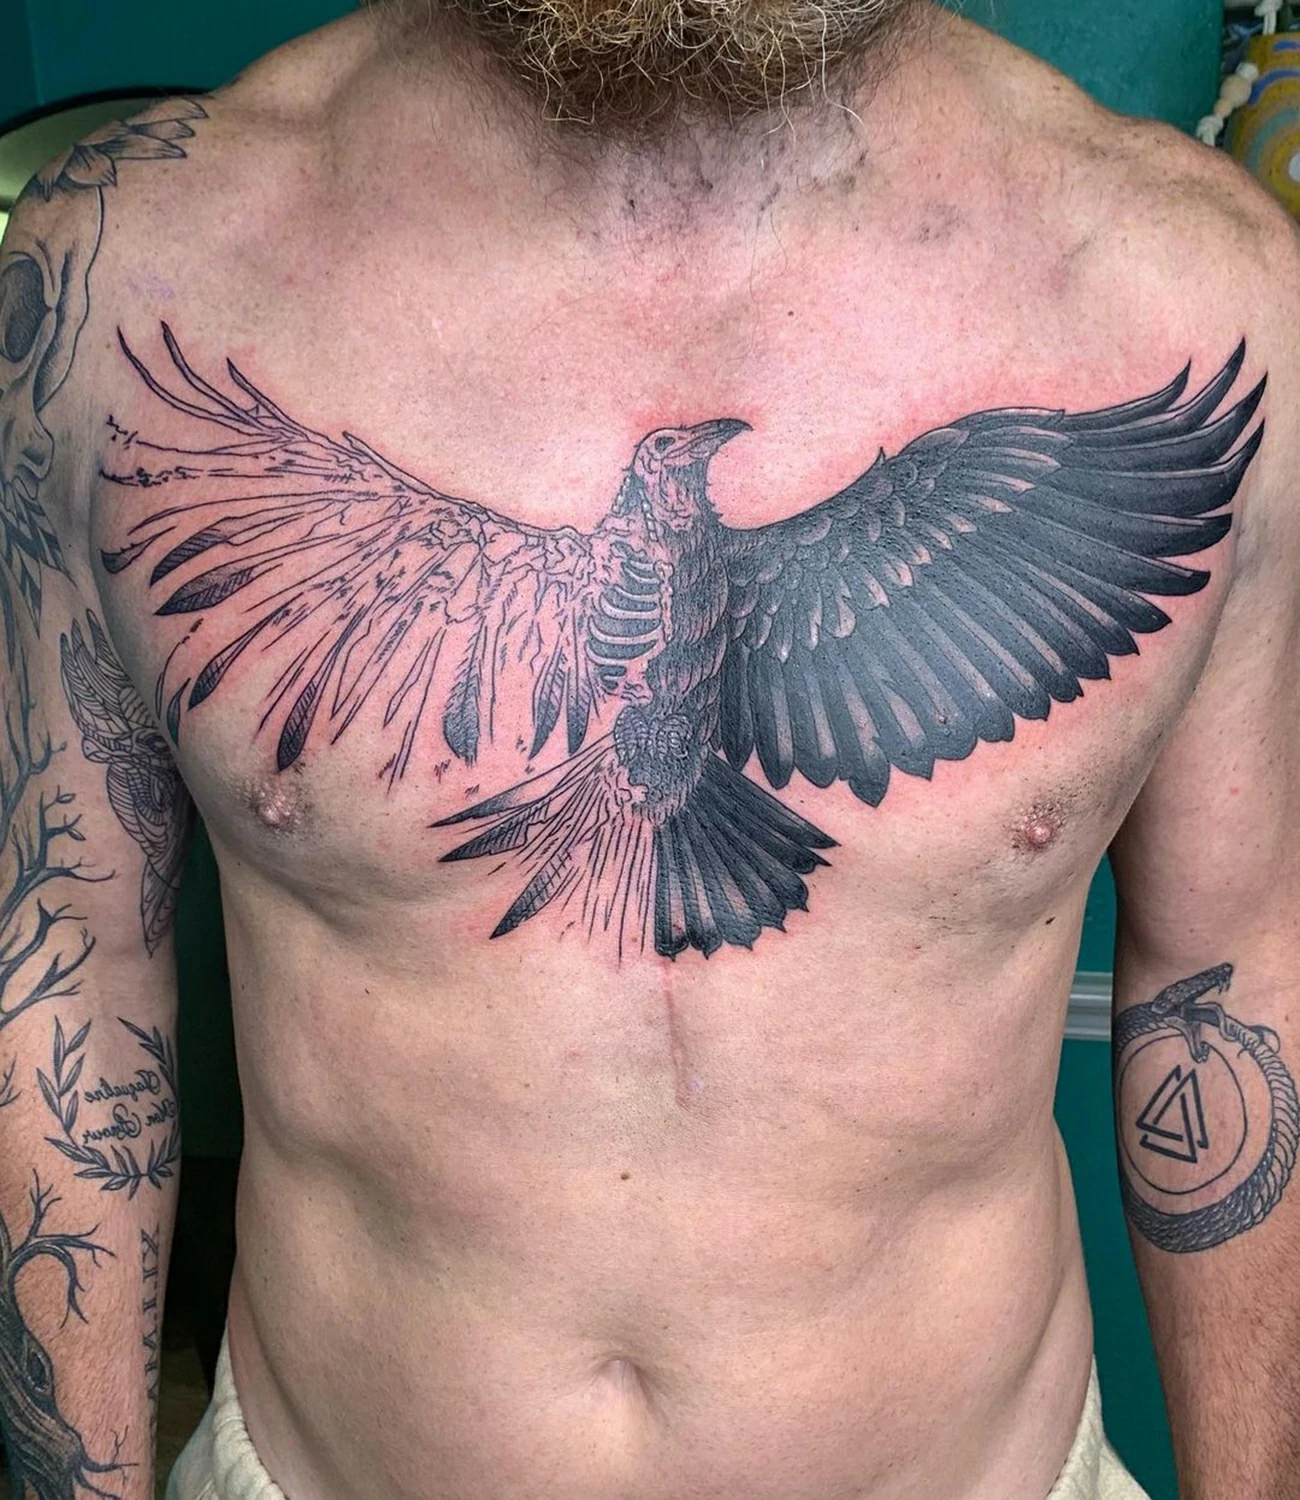 Raven chest tattoo: A large, detailed raven tattoo designed to cover the chest area.